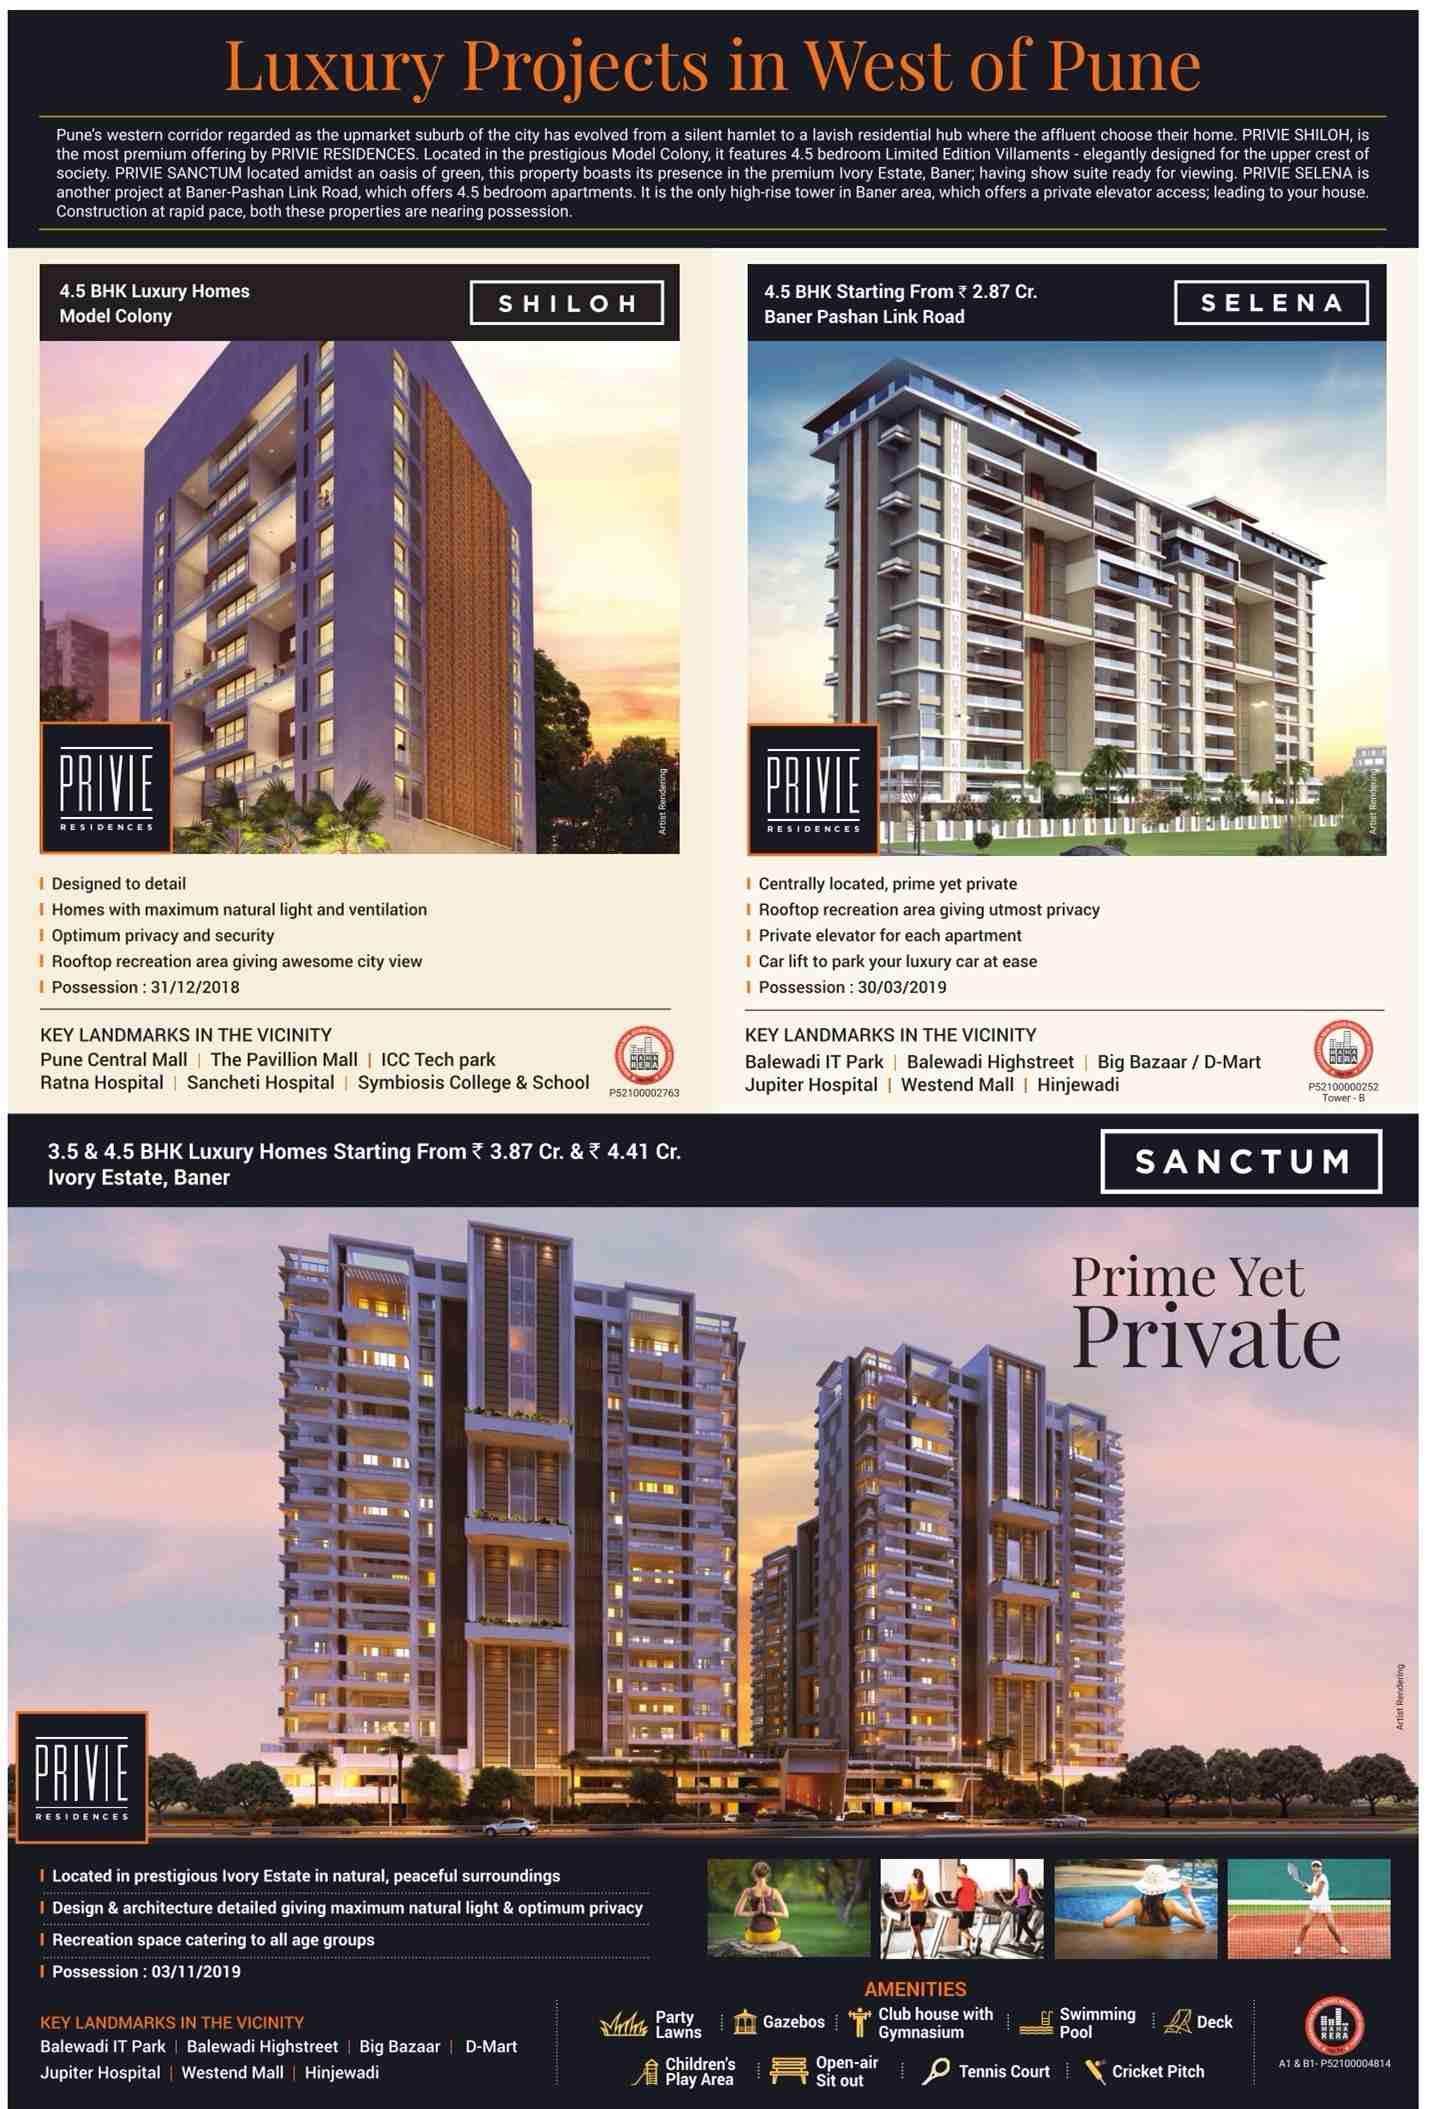 Reside in luxury projects of Privie Residences in Pune Update